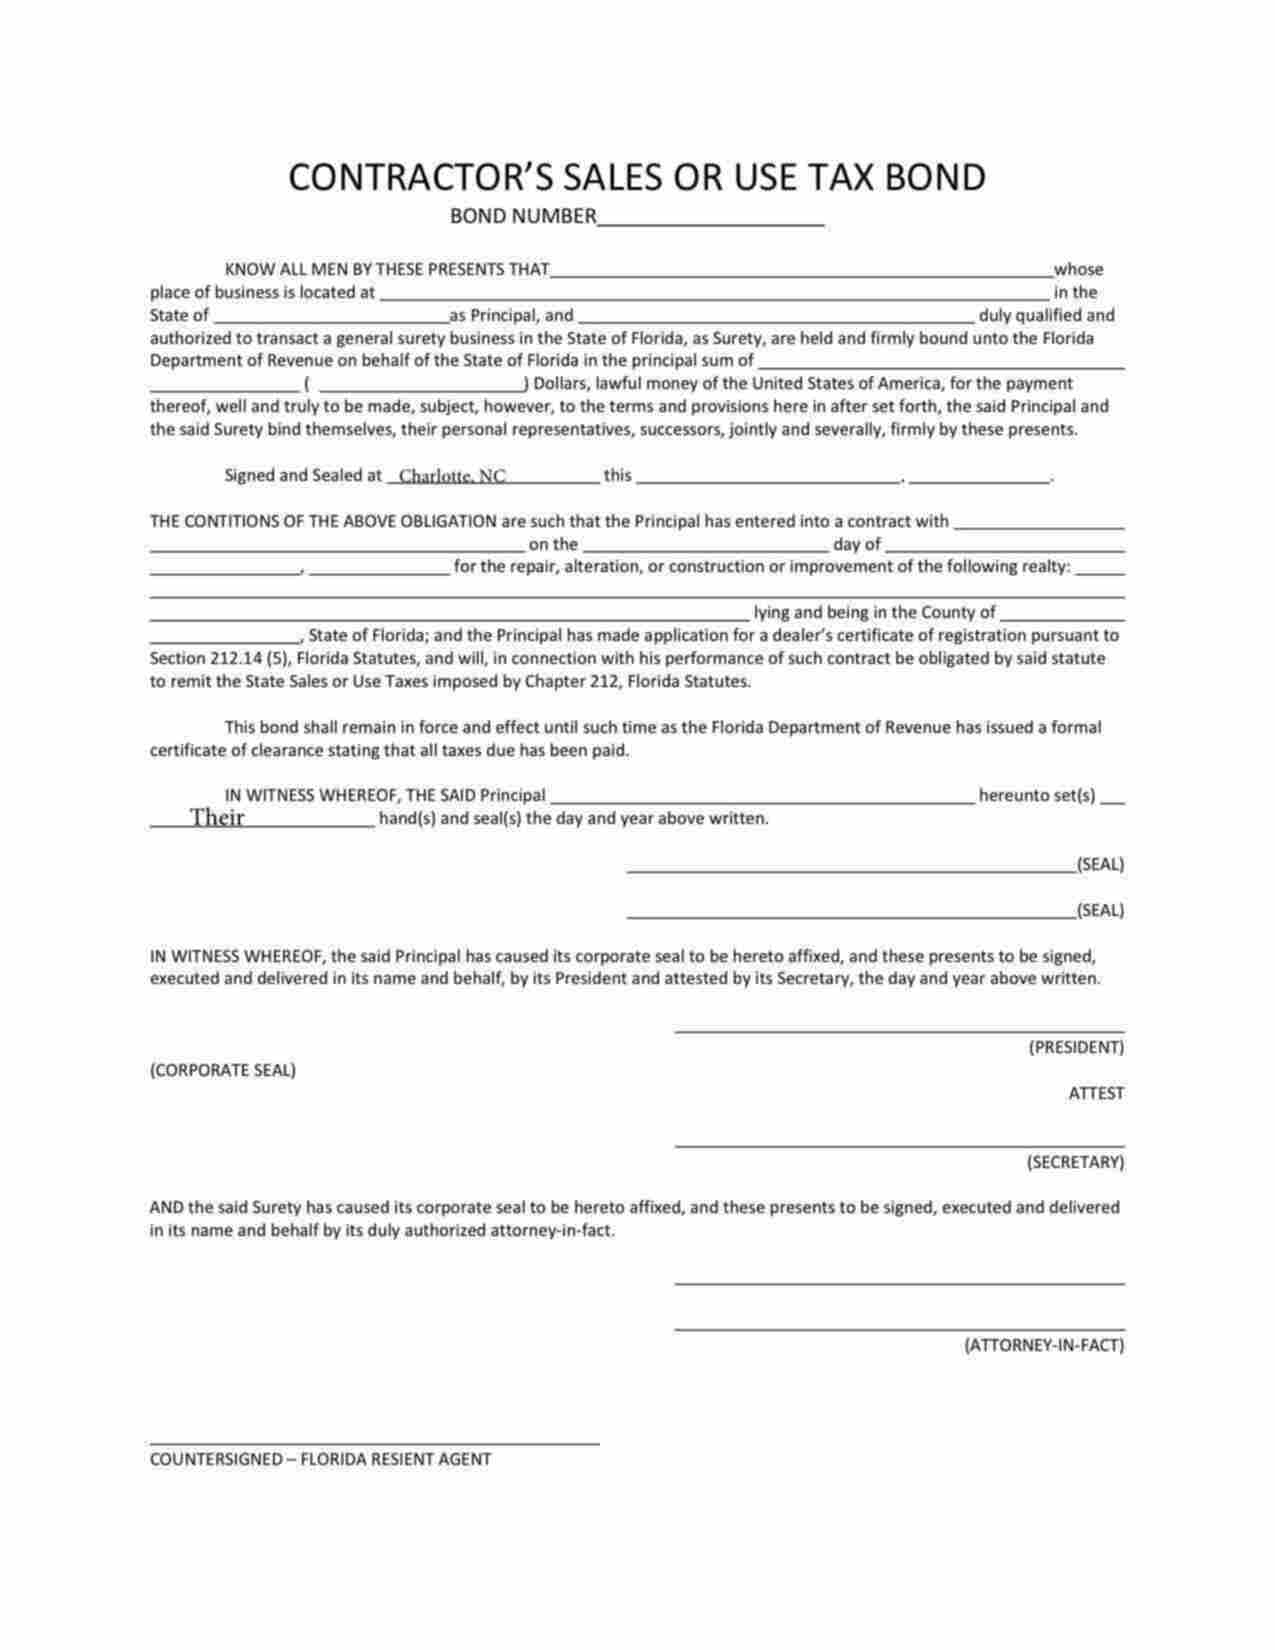 Florida Contractor's Sales or Use Tax Bond Form